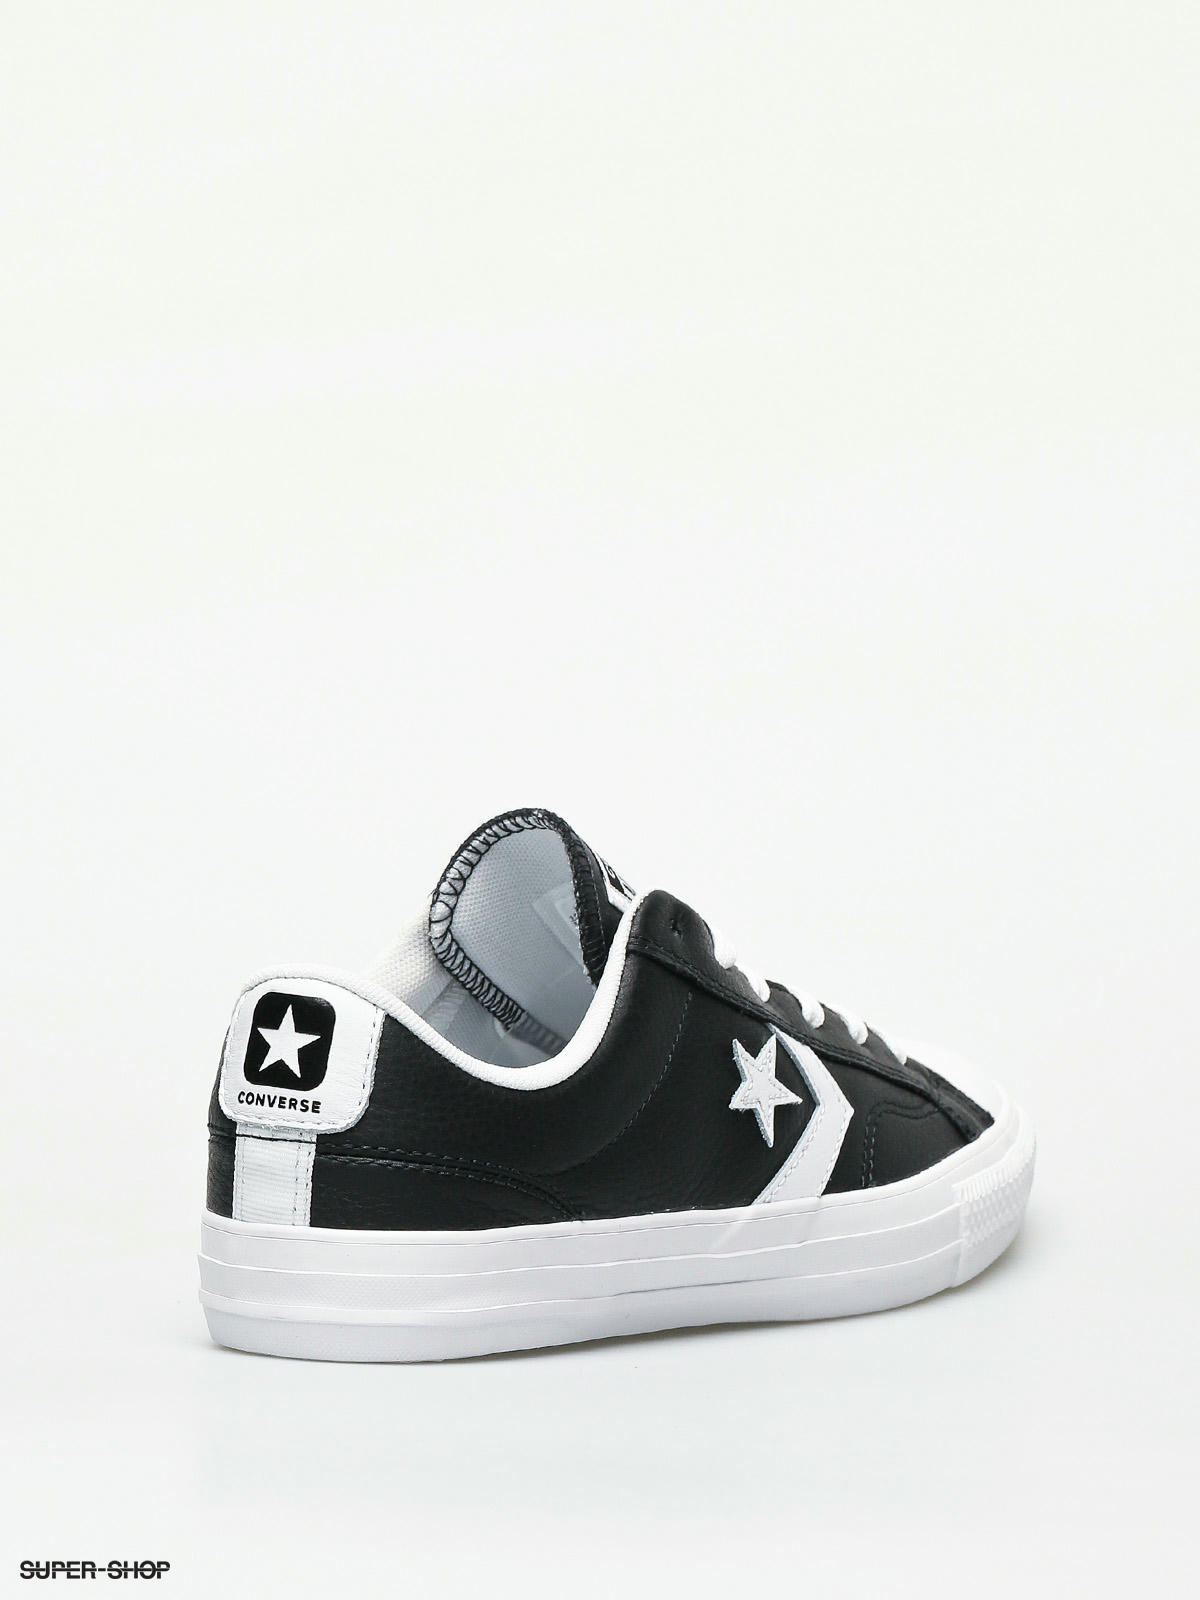 converse star player black and white